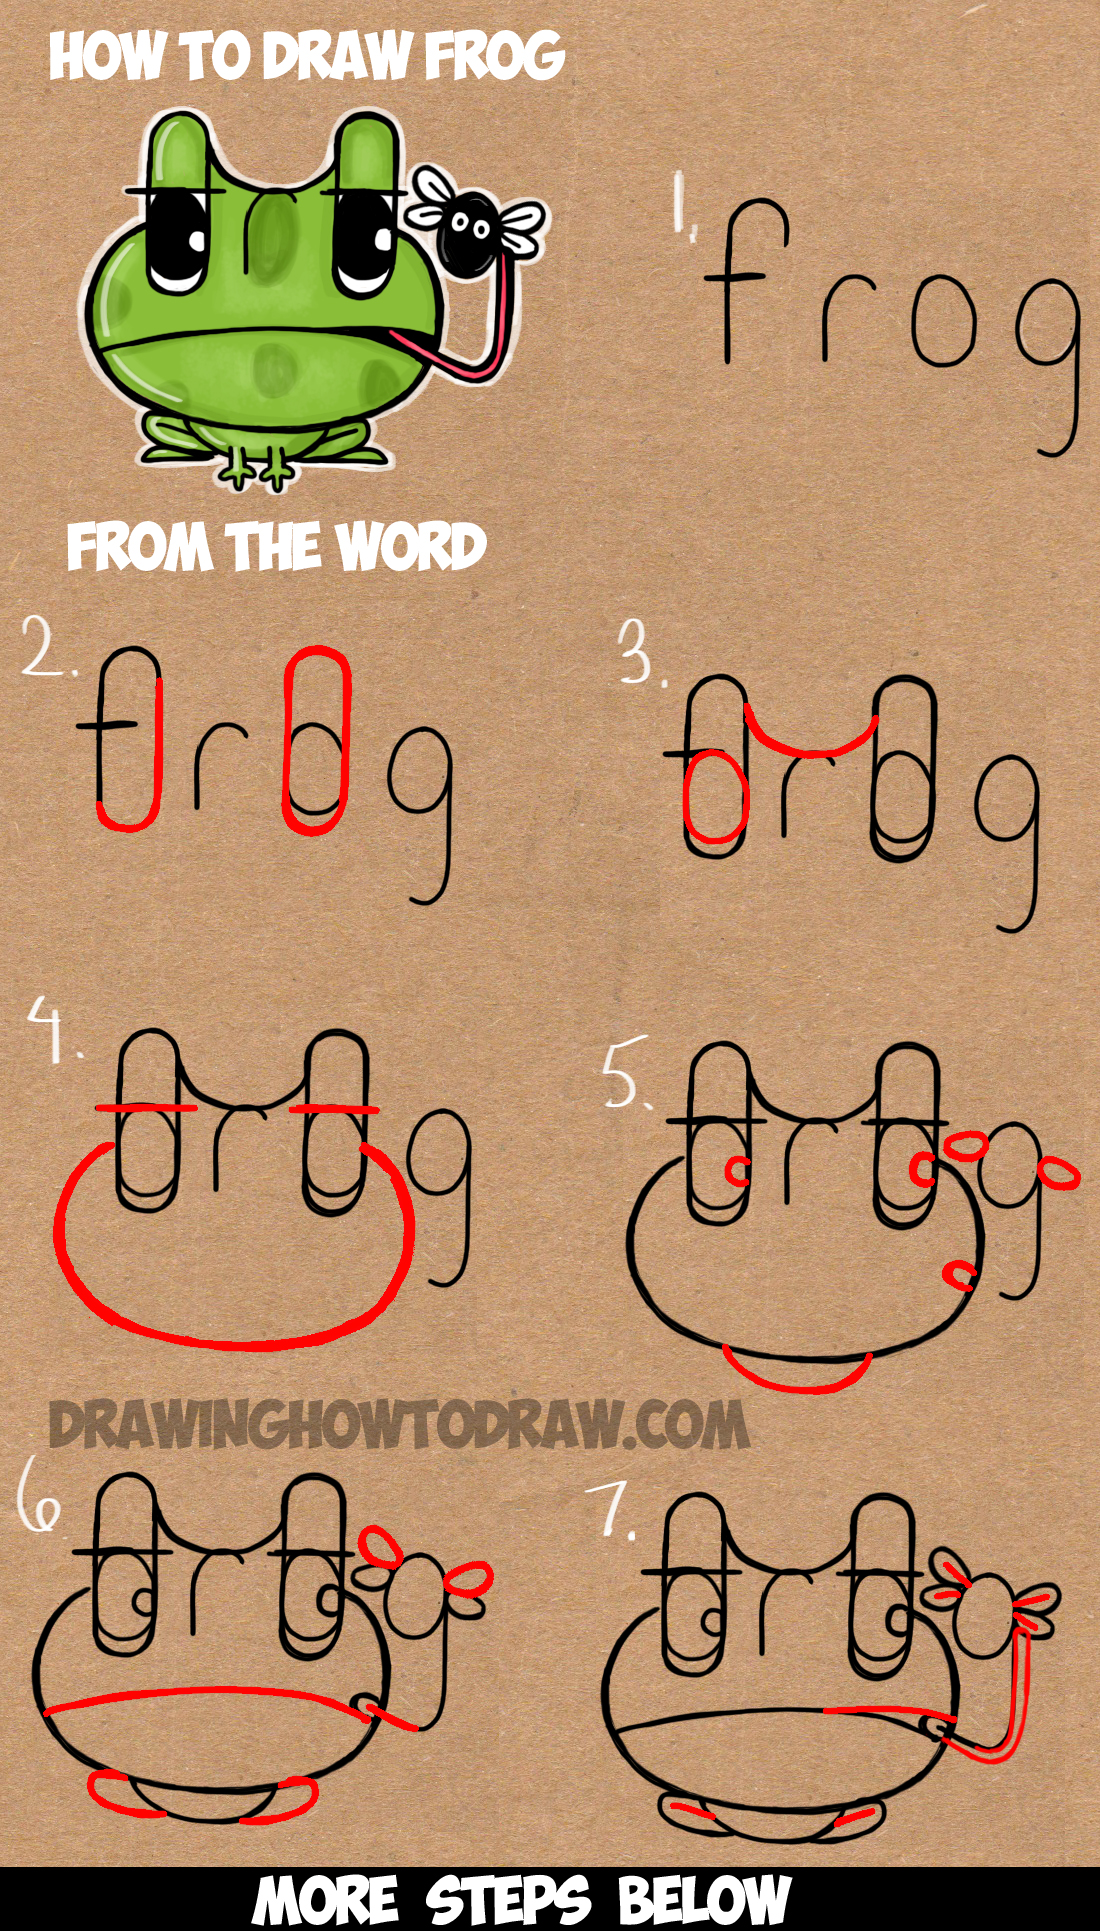 How to Draw Cartoon Frogs from the Word Frog Easy Step by Step Word Cartoon Tutorial for Kids